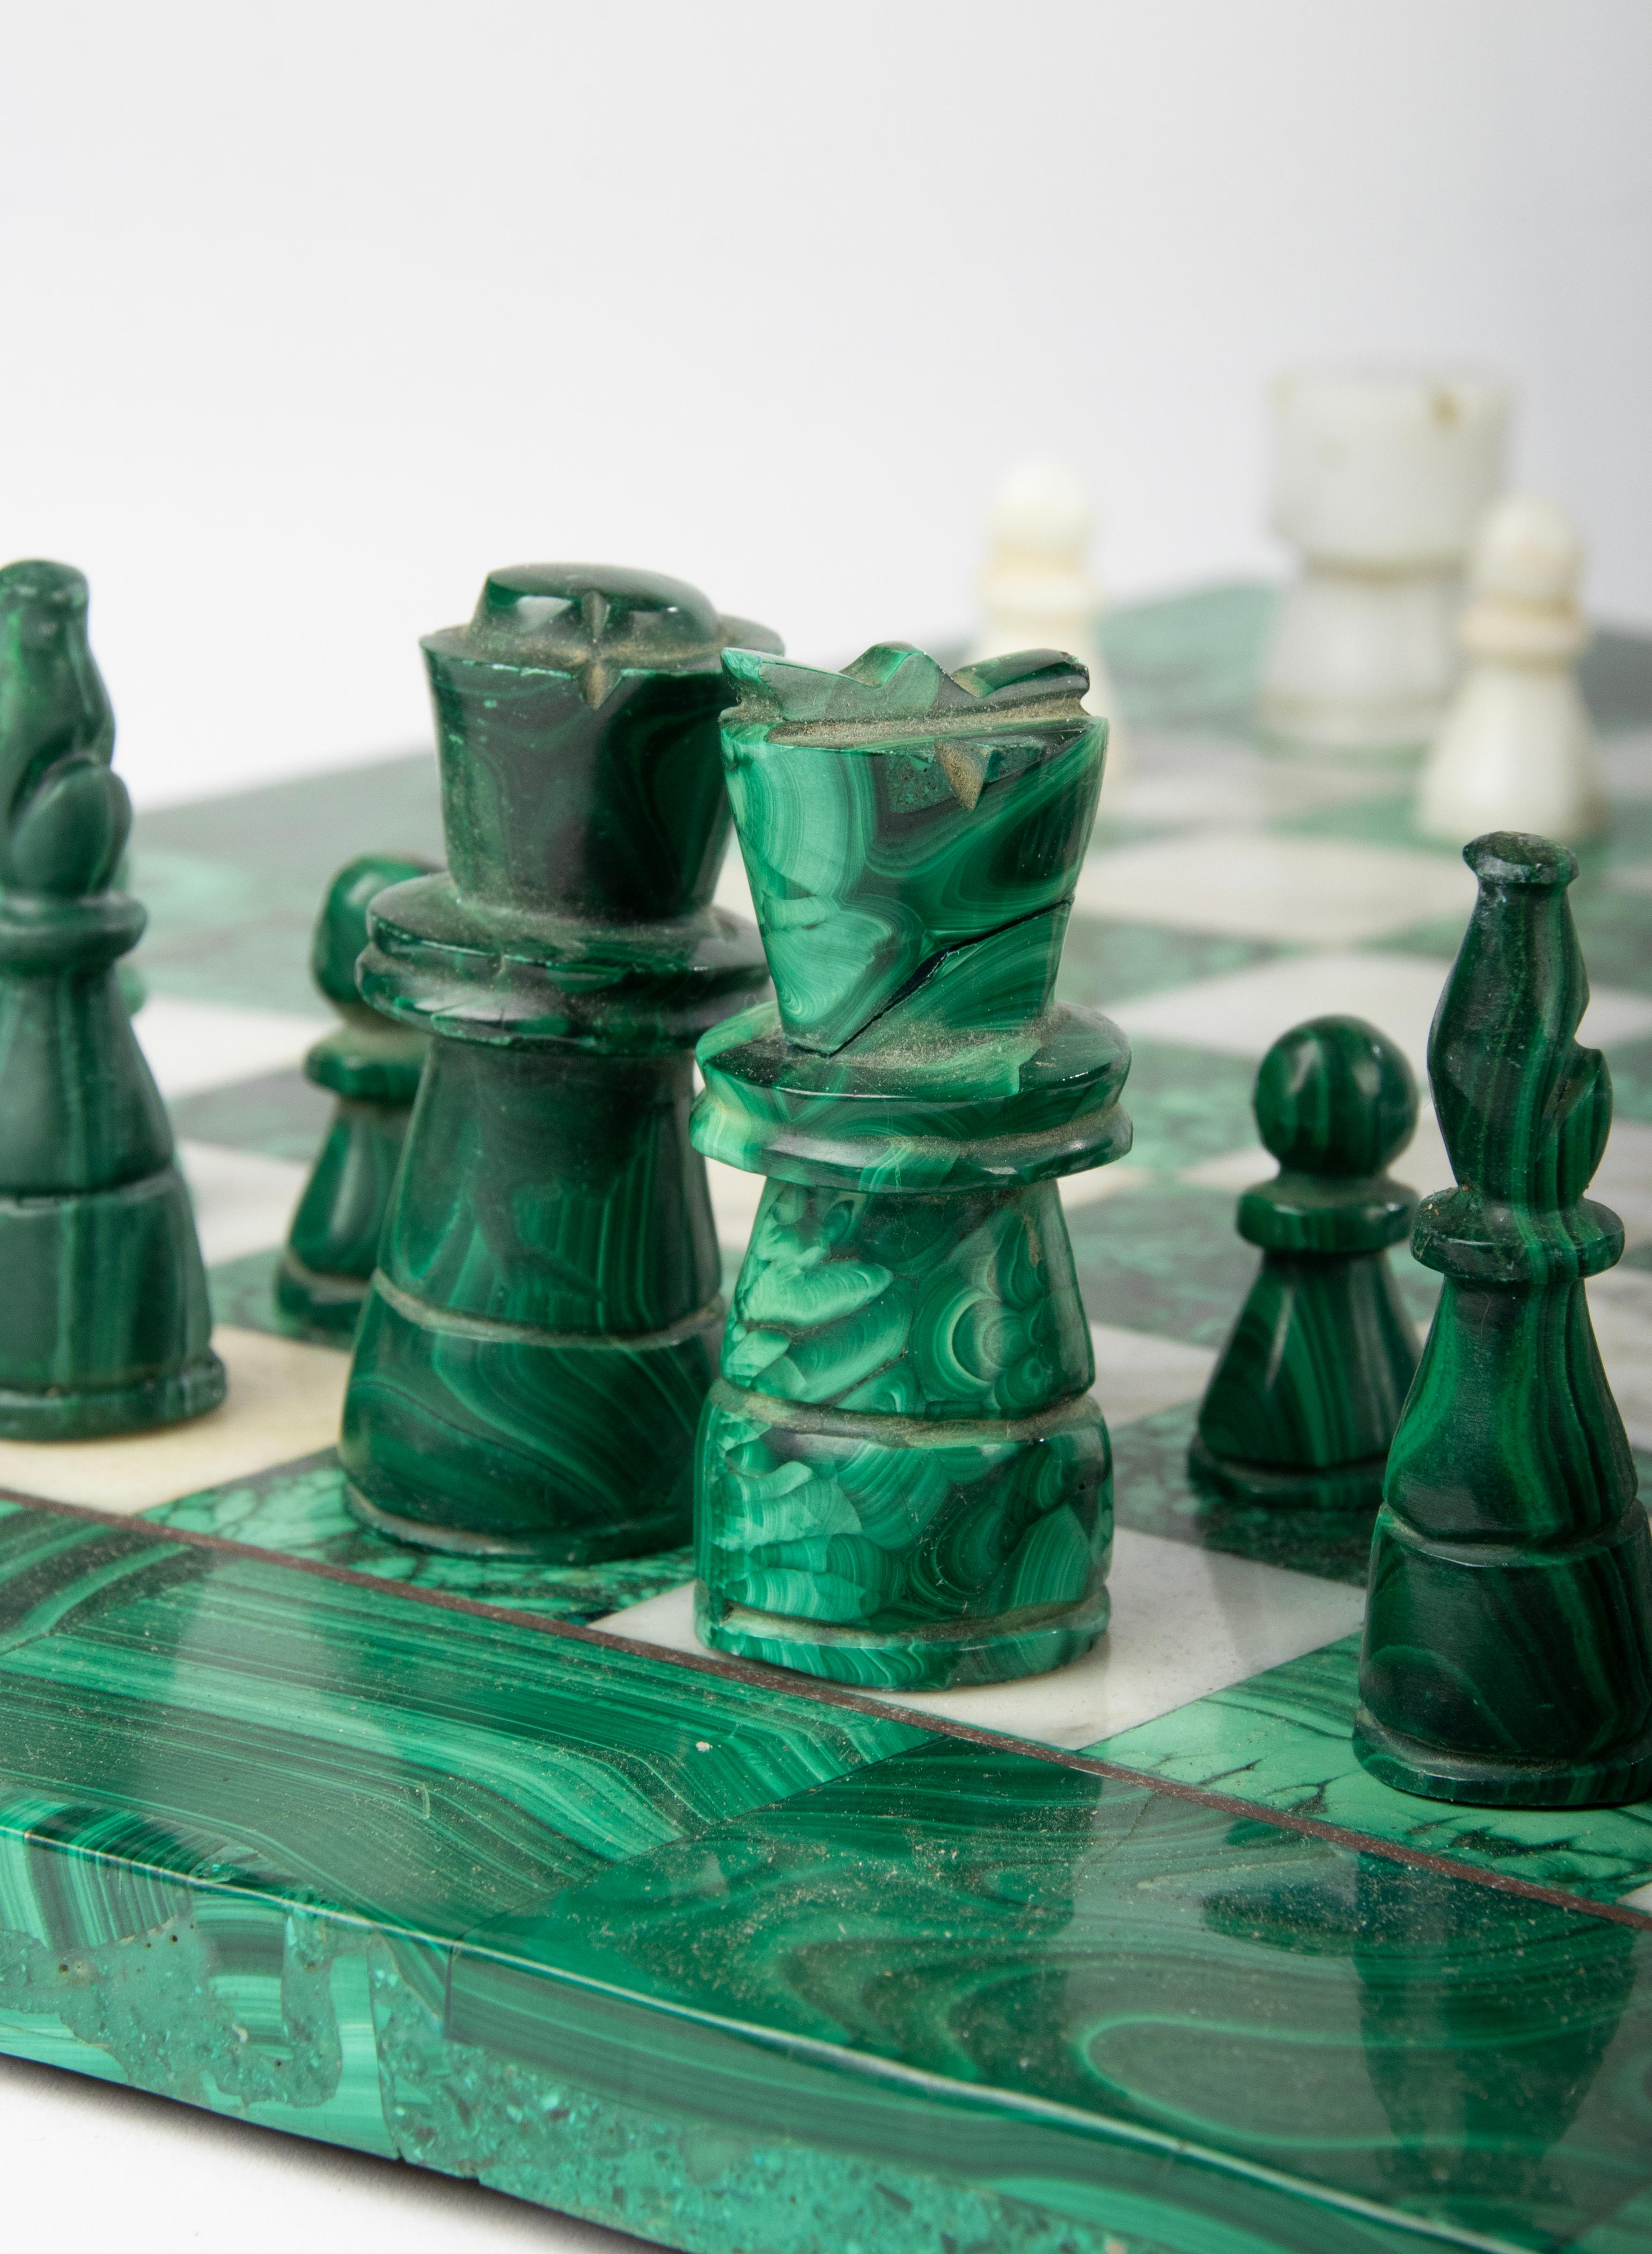 Italian Mid 20th Century Malachite and Marble Chessboard Wit Pieces